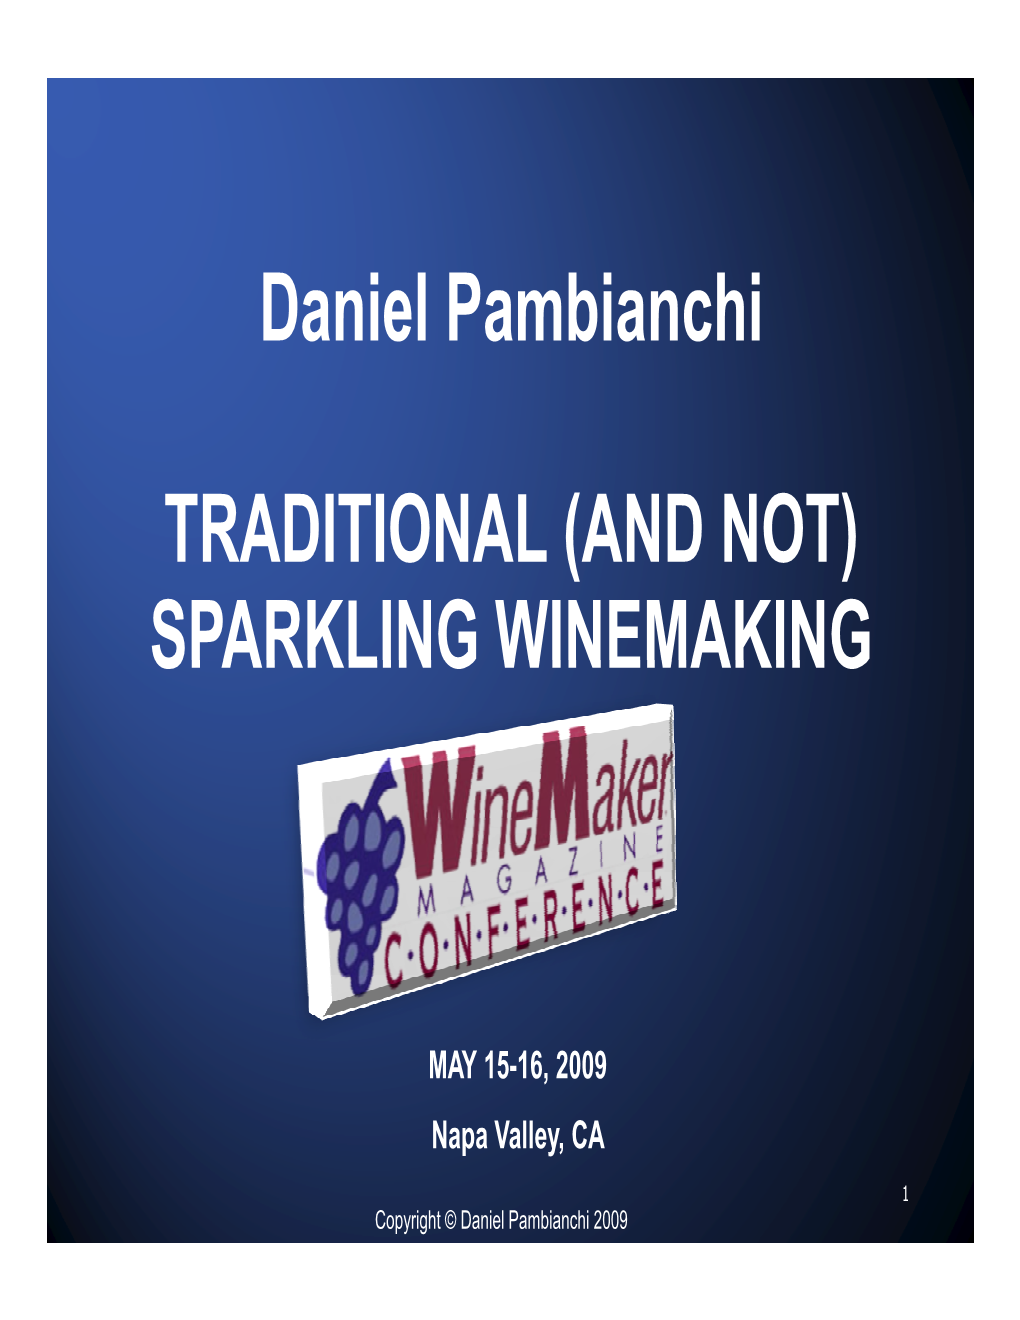 Daniel Pambianchi TRADITIONAL (AND NOT) SPARKLING WINEMAKING SPARKLING WINEMAKING